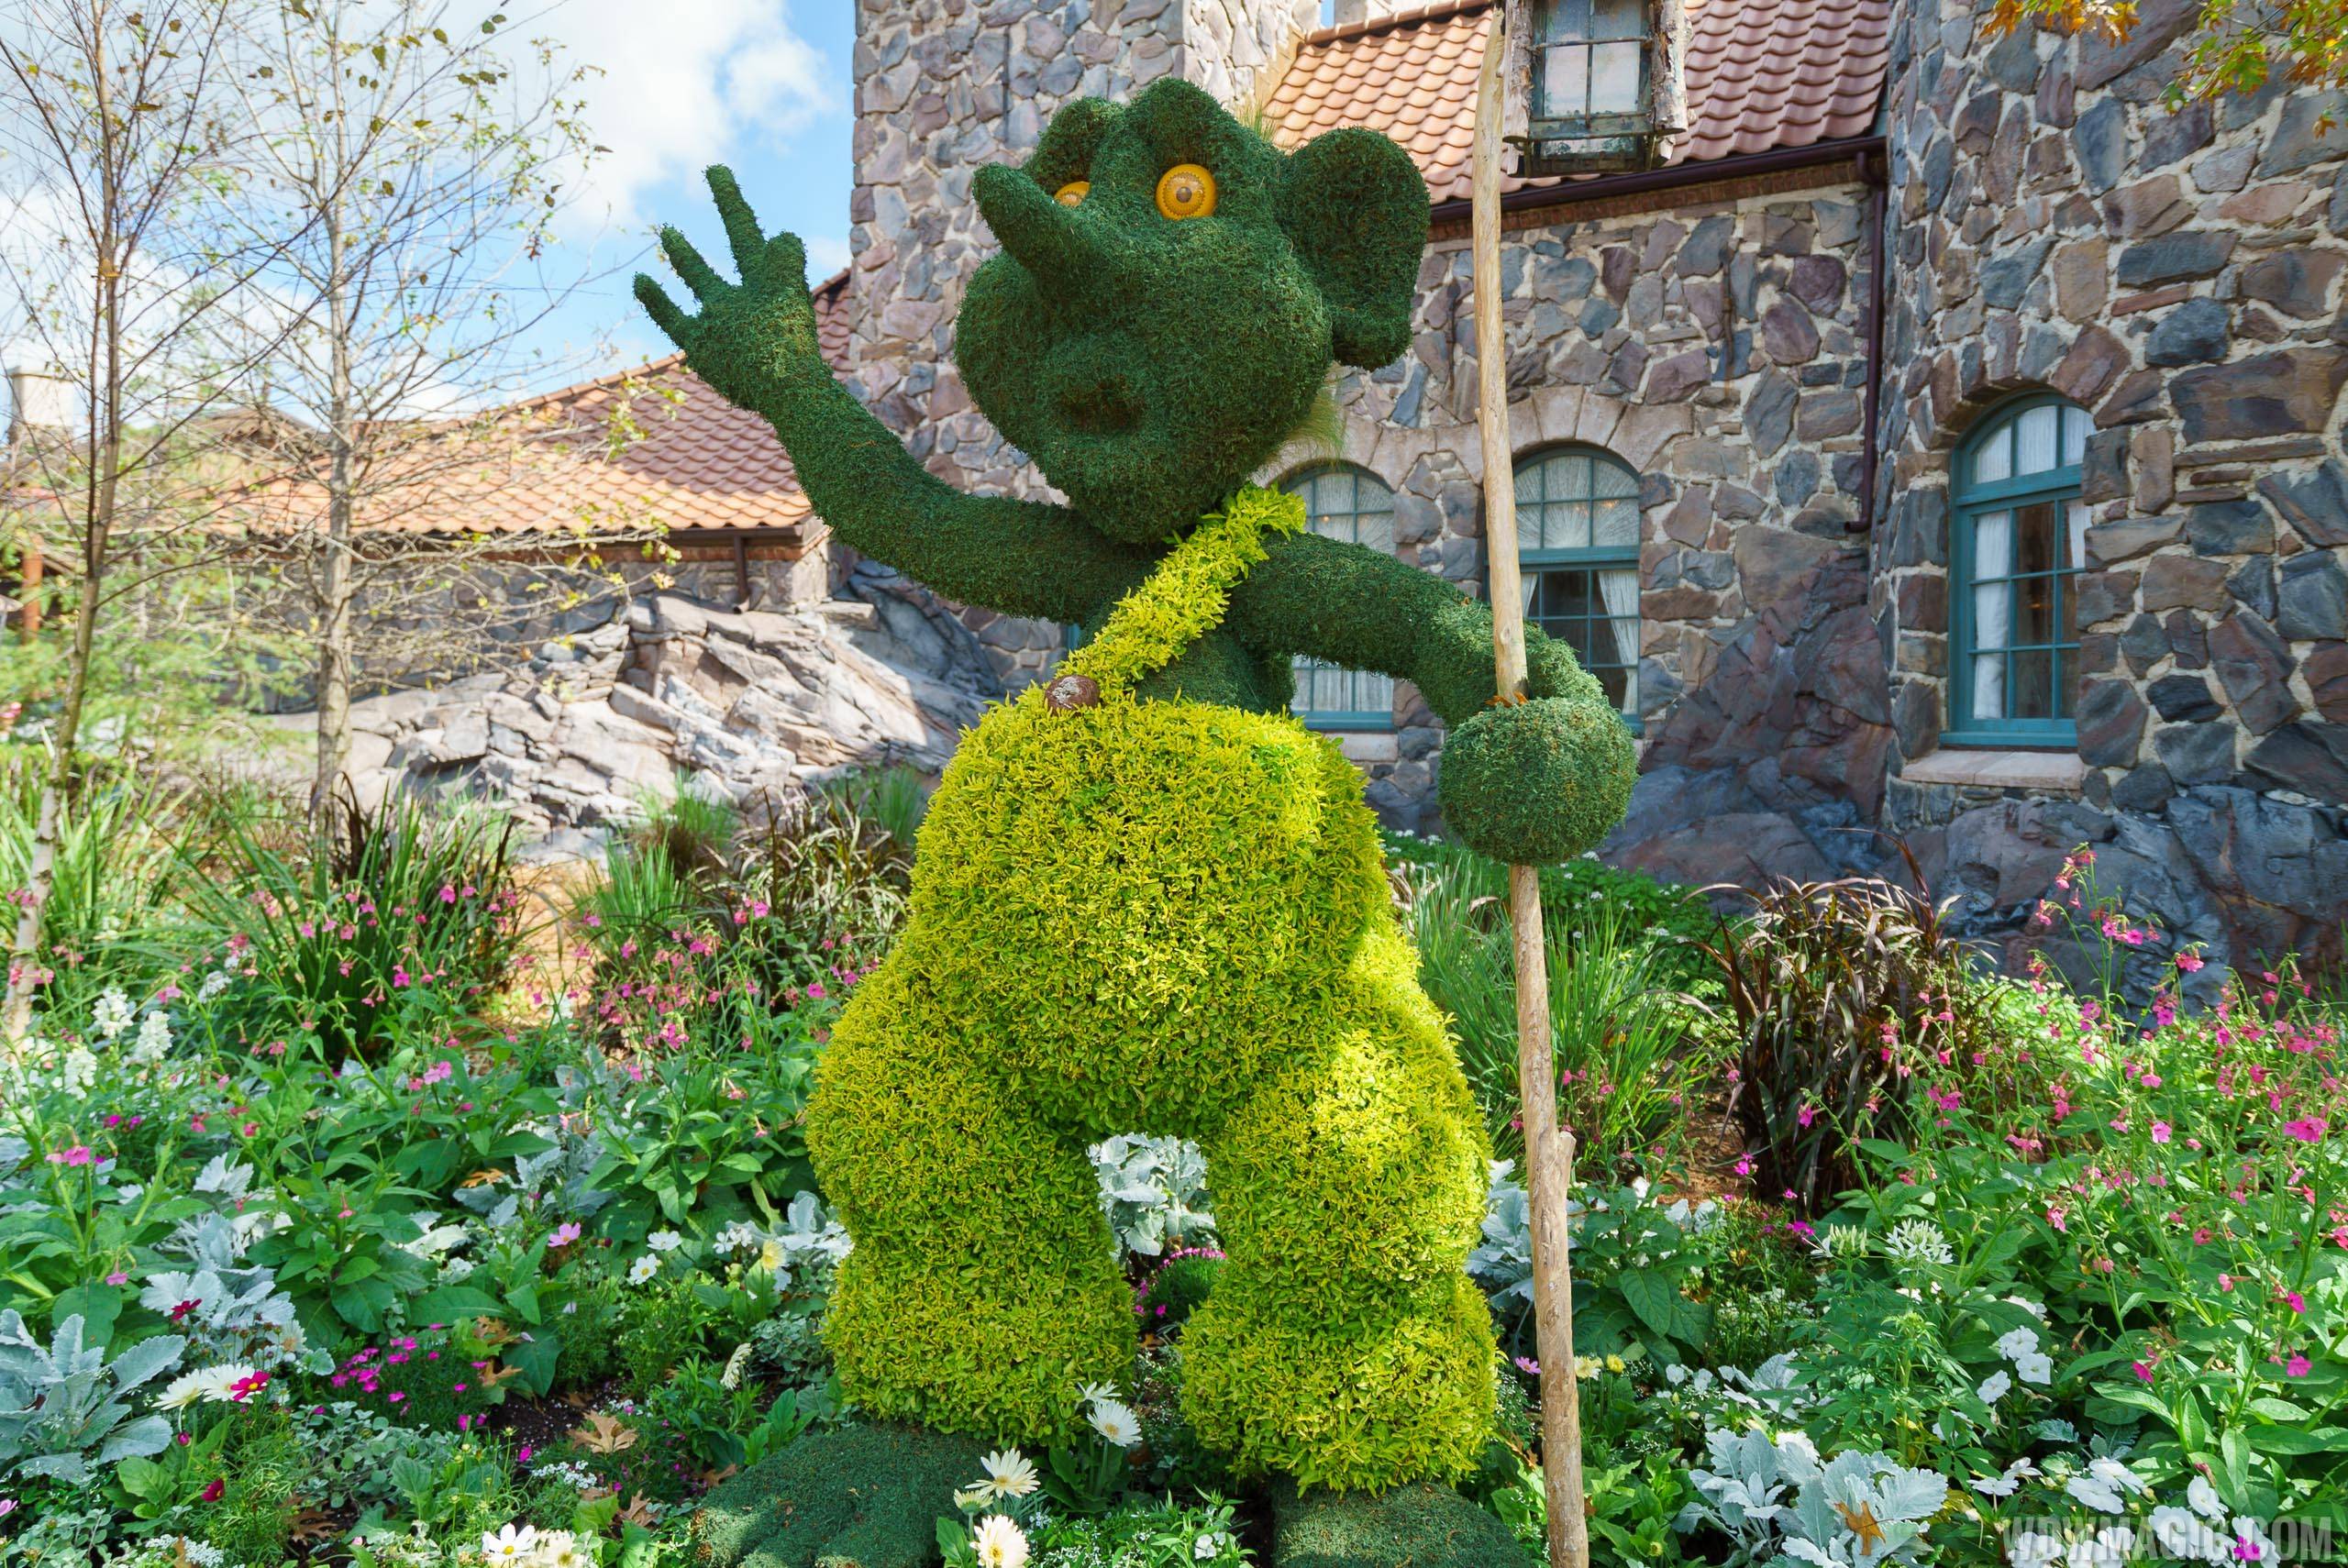 2017 Flower and Garden Festival - Troll topiary at the Norway Pavilion